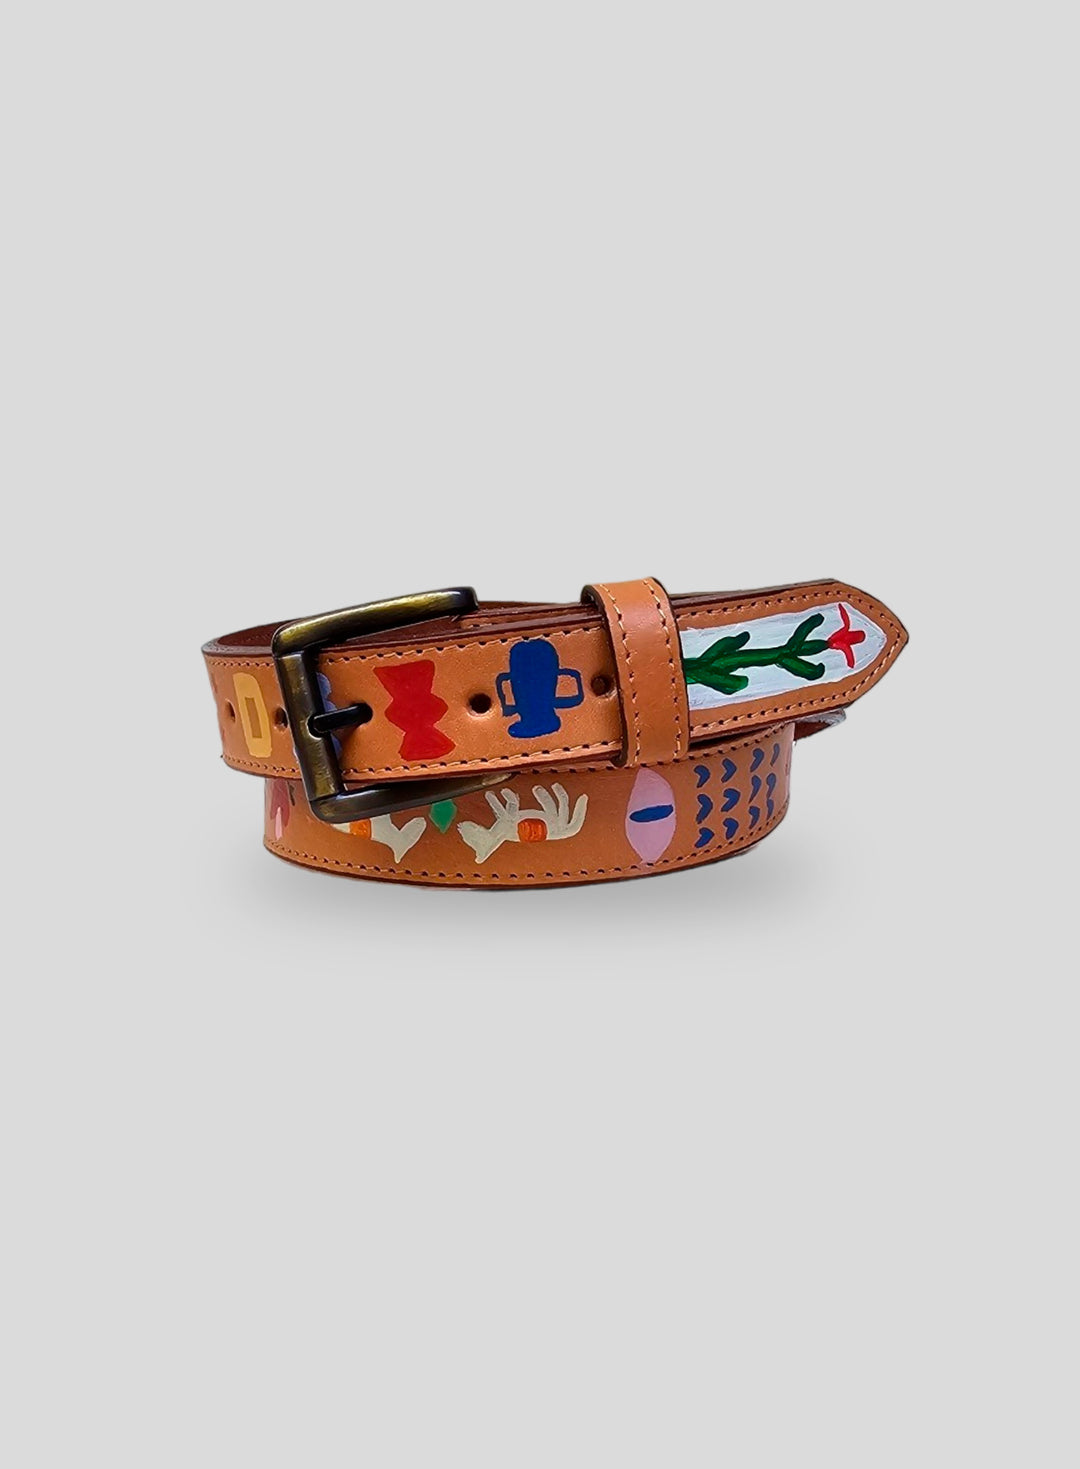 Hand-Painted Leather Belt 4 (Size 32)